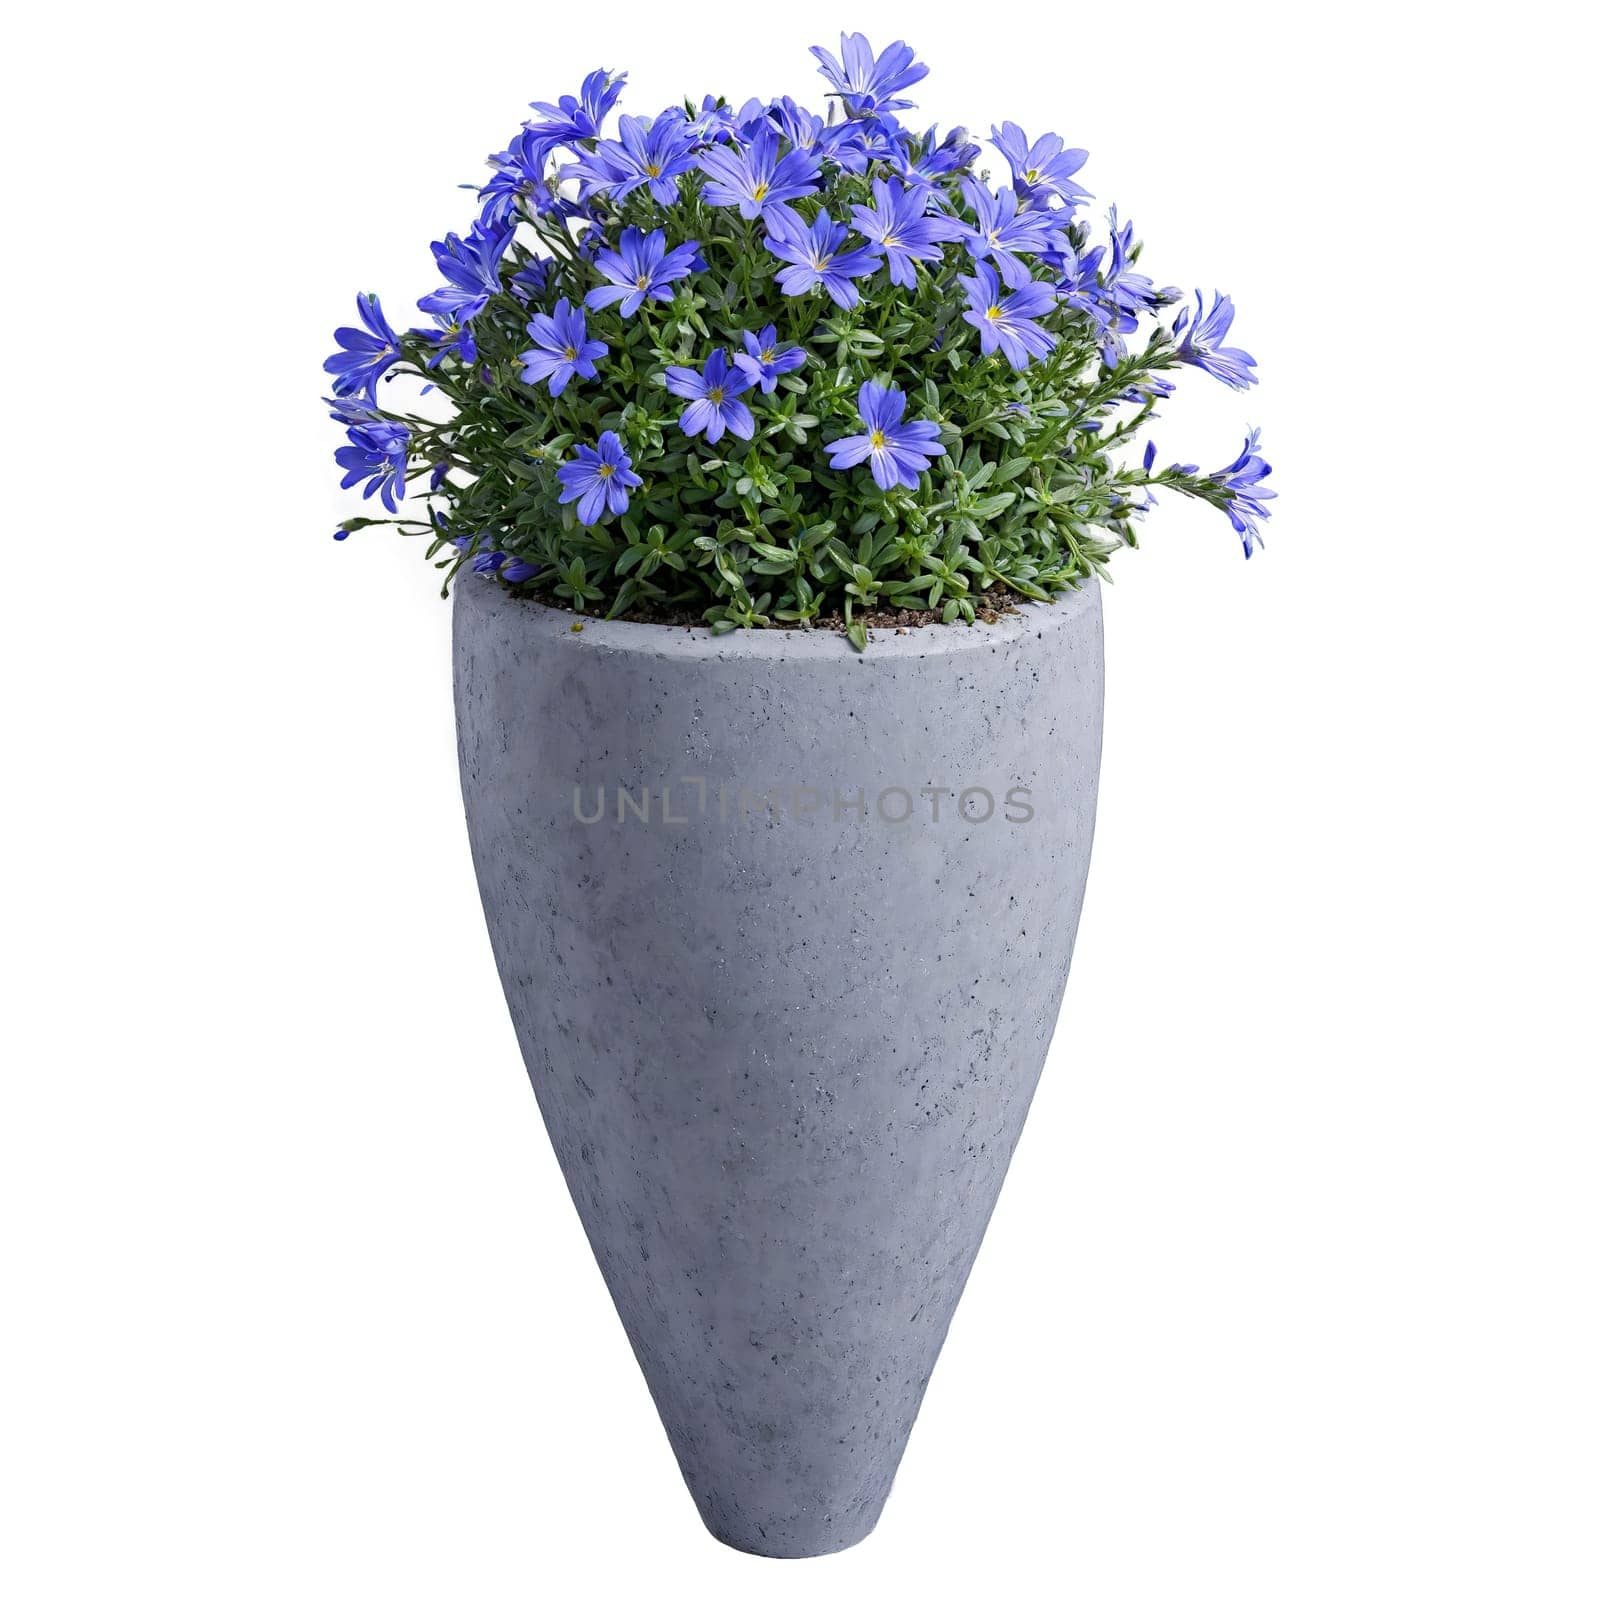 Scaevola cascading blue fan shaped flowers in a gray concrete planter stems trailing over the. Plants isolated on transparent background.